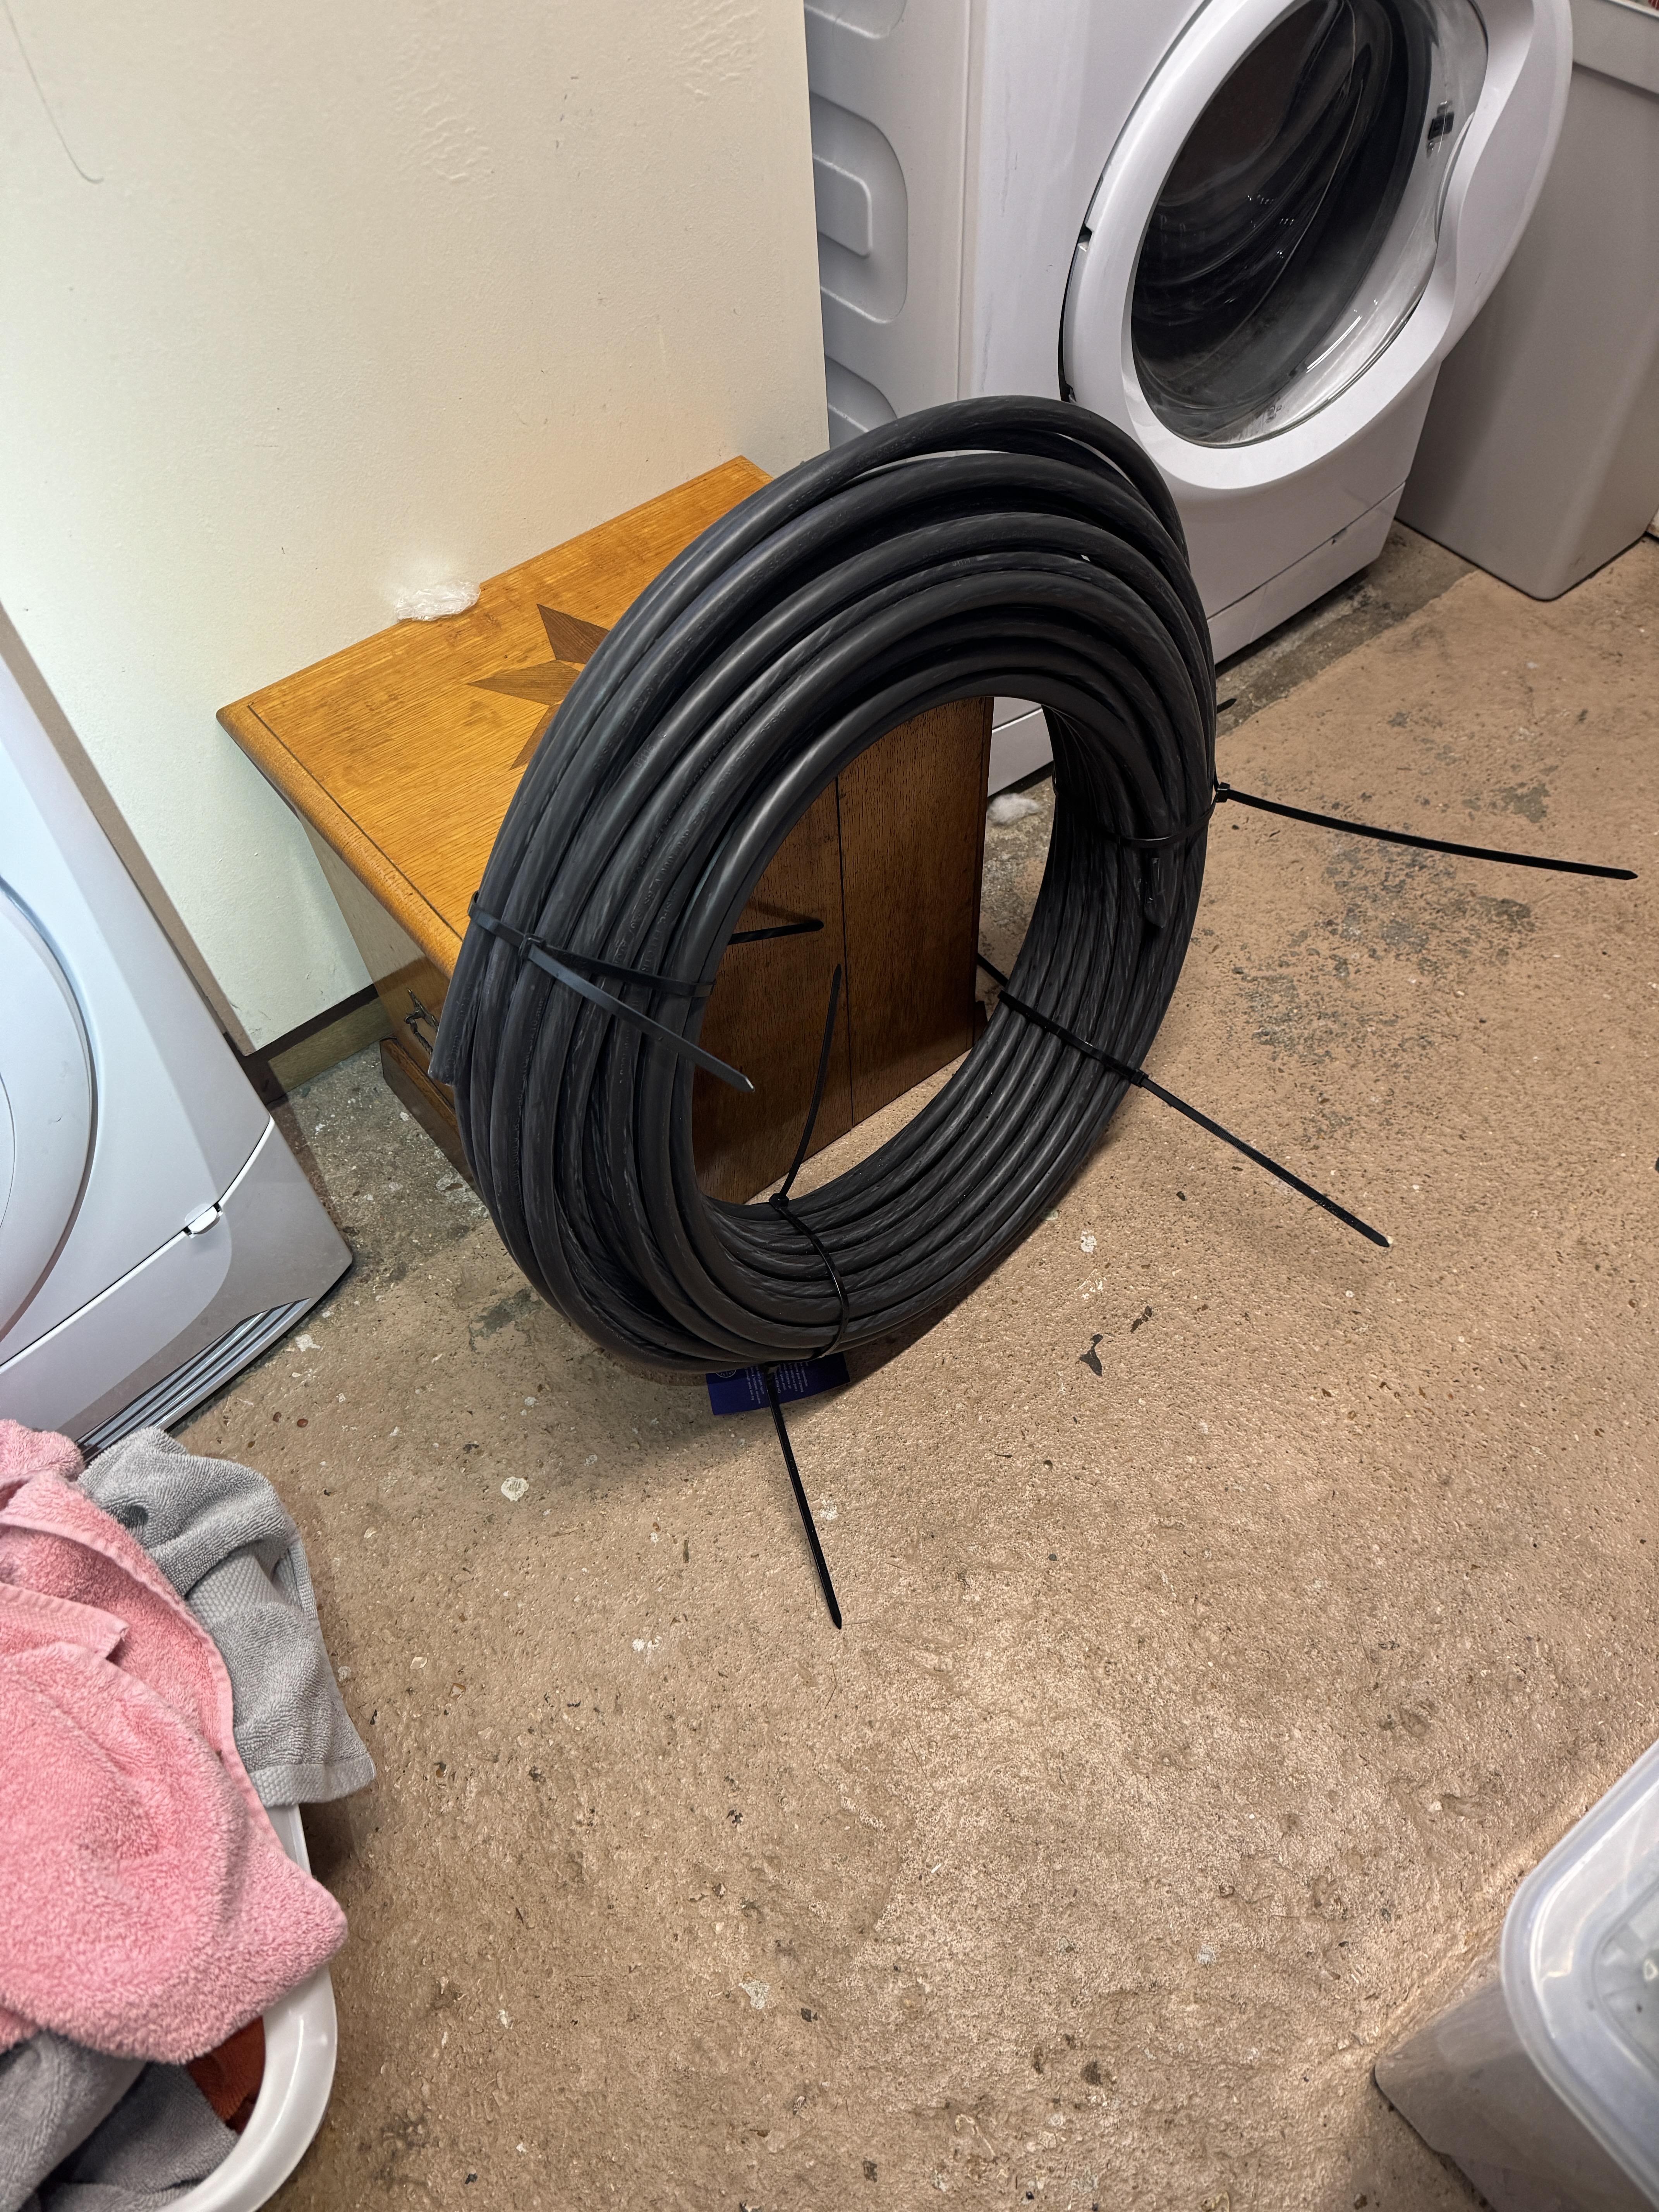 bigger cable to accommodate future requirements of summerhouse